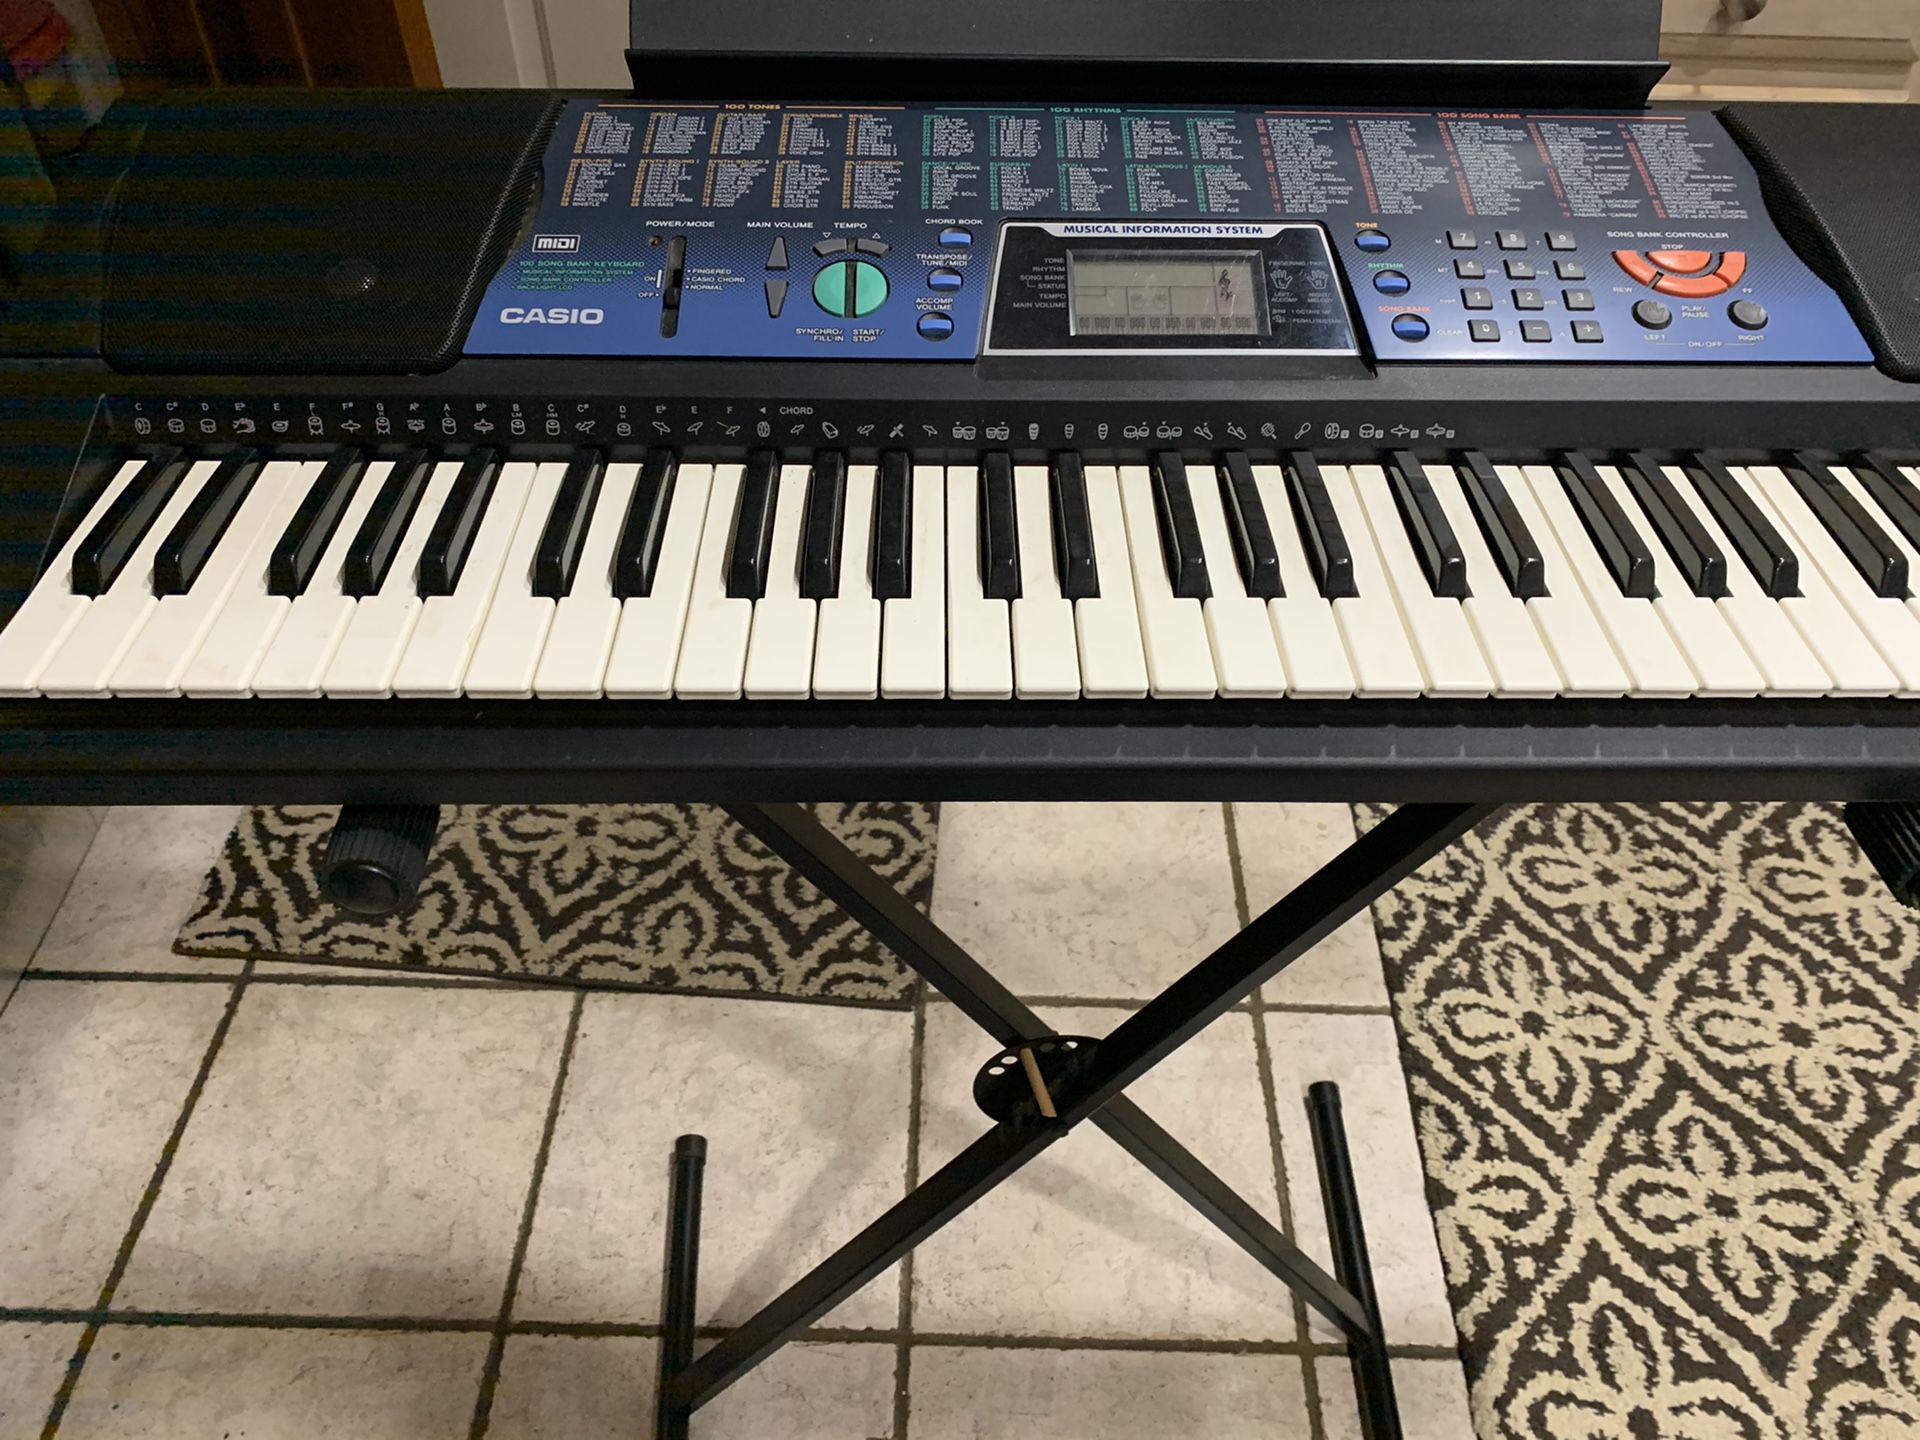 Casio keyboard Model 511. Stand and seat included. Excellent condition